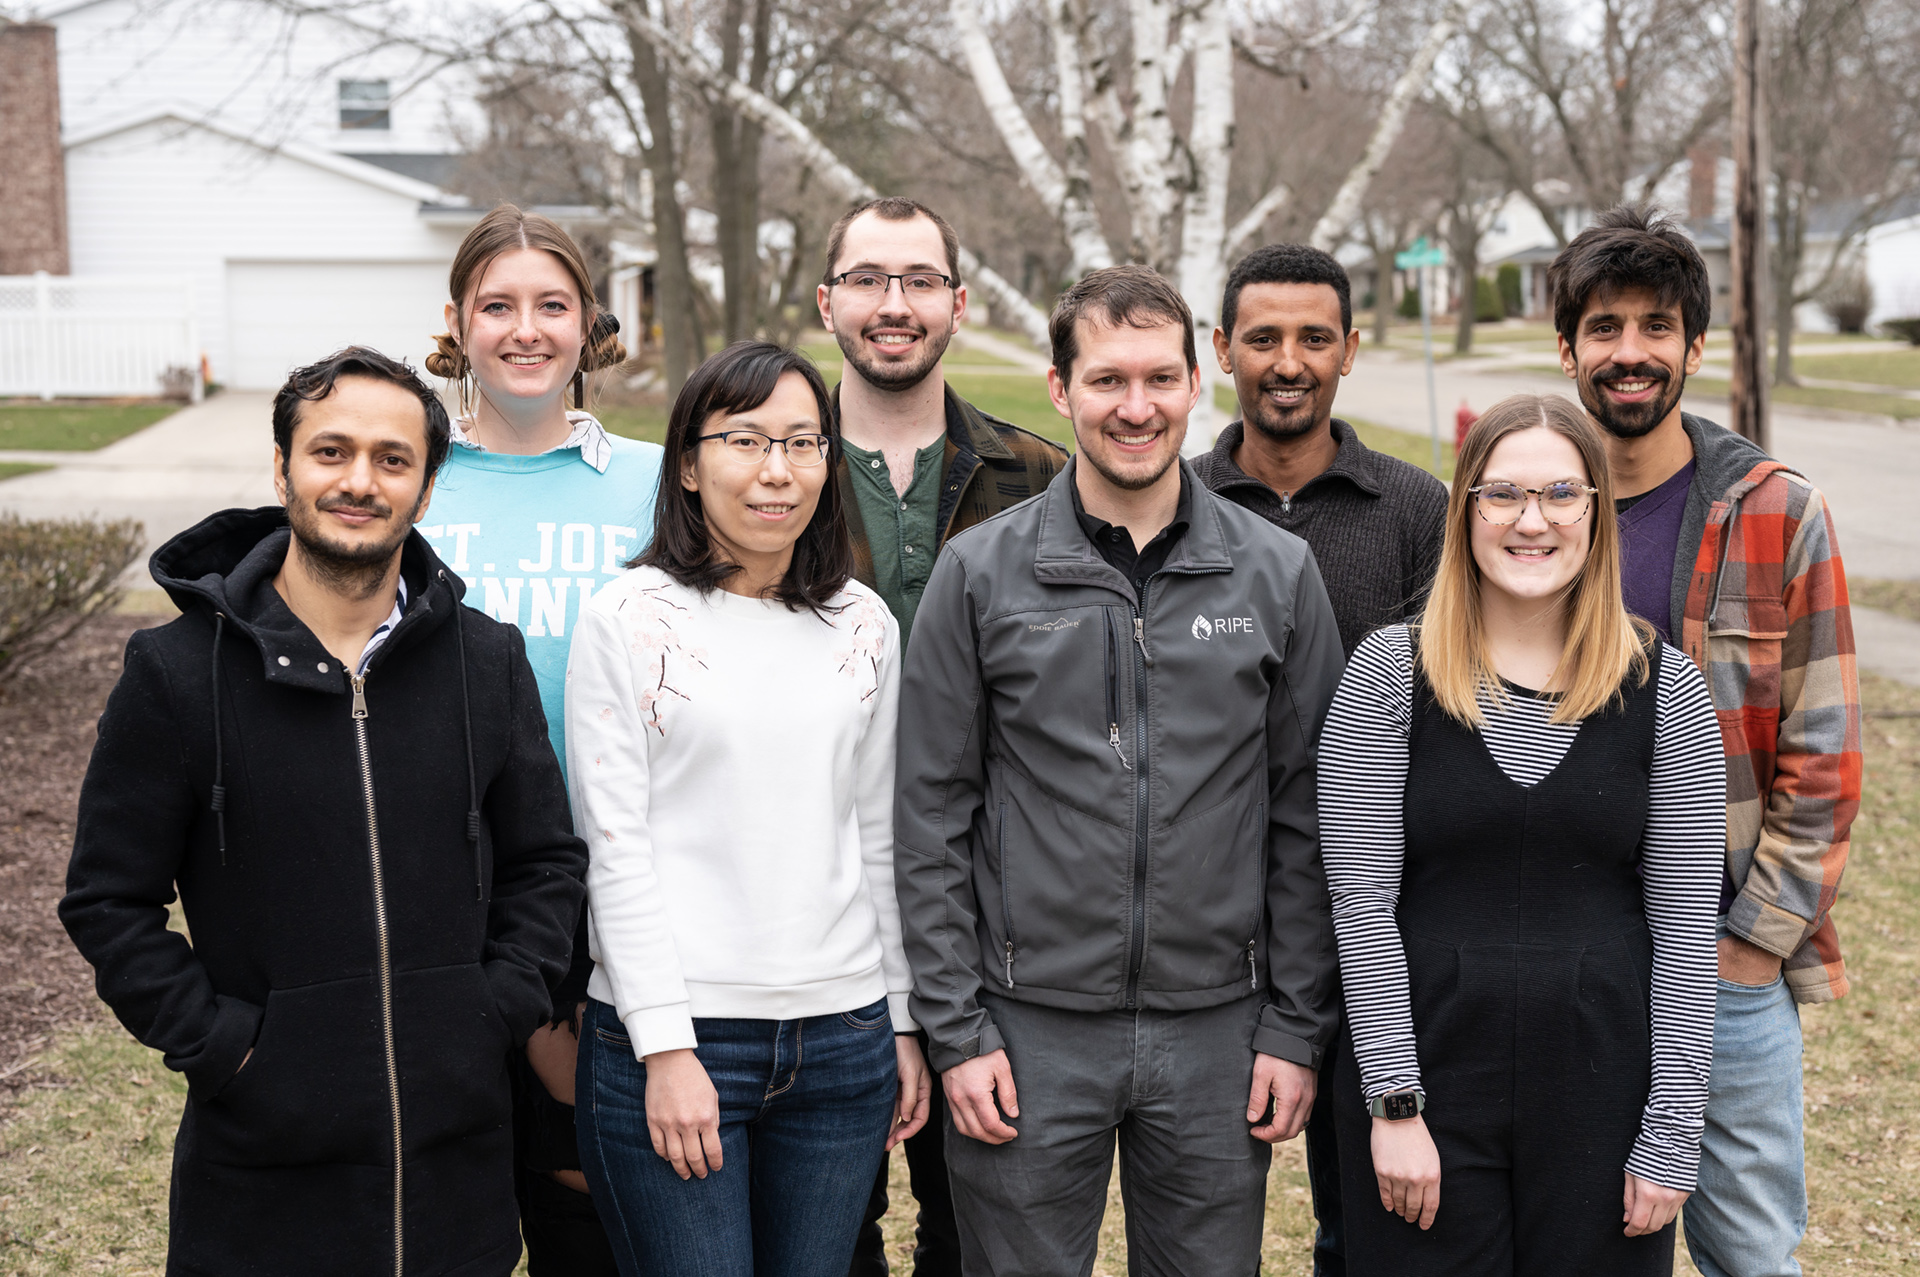 A photo of the Walker lab team members at Michigan State University.